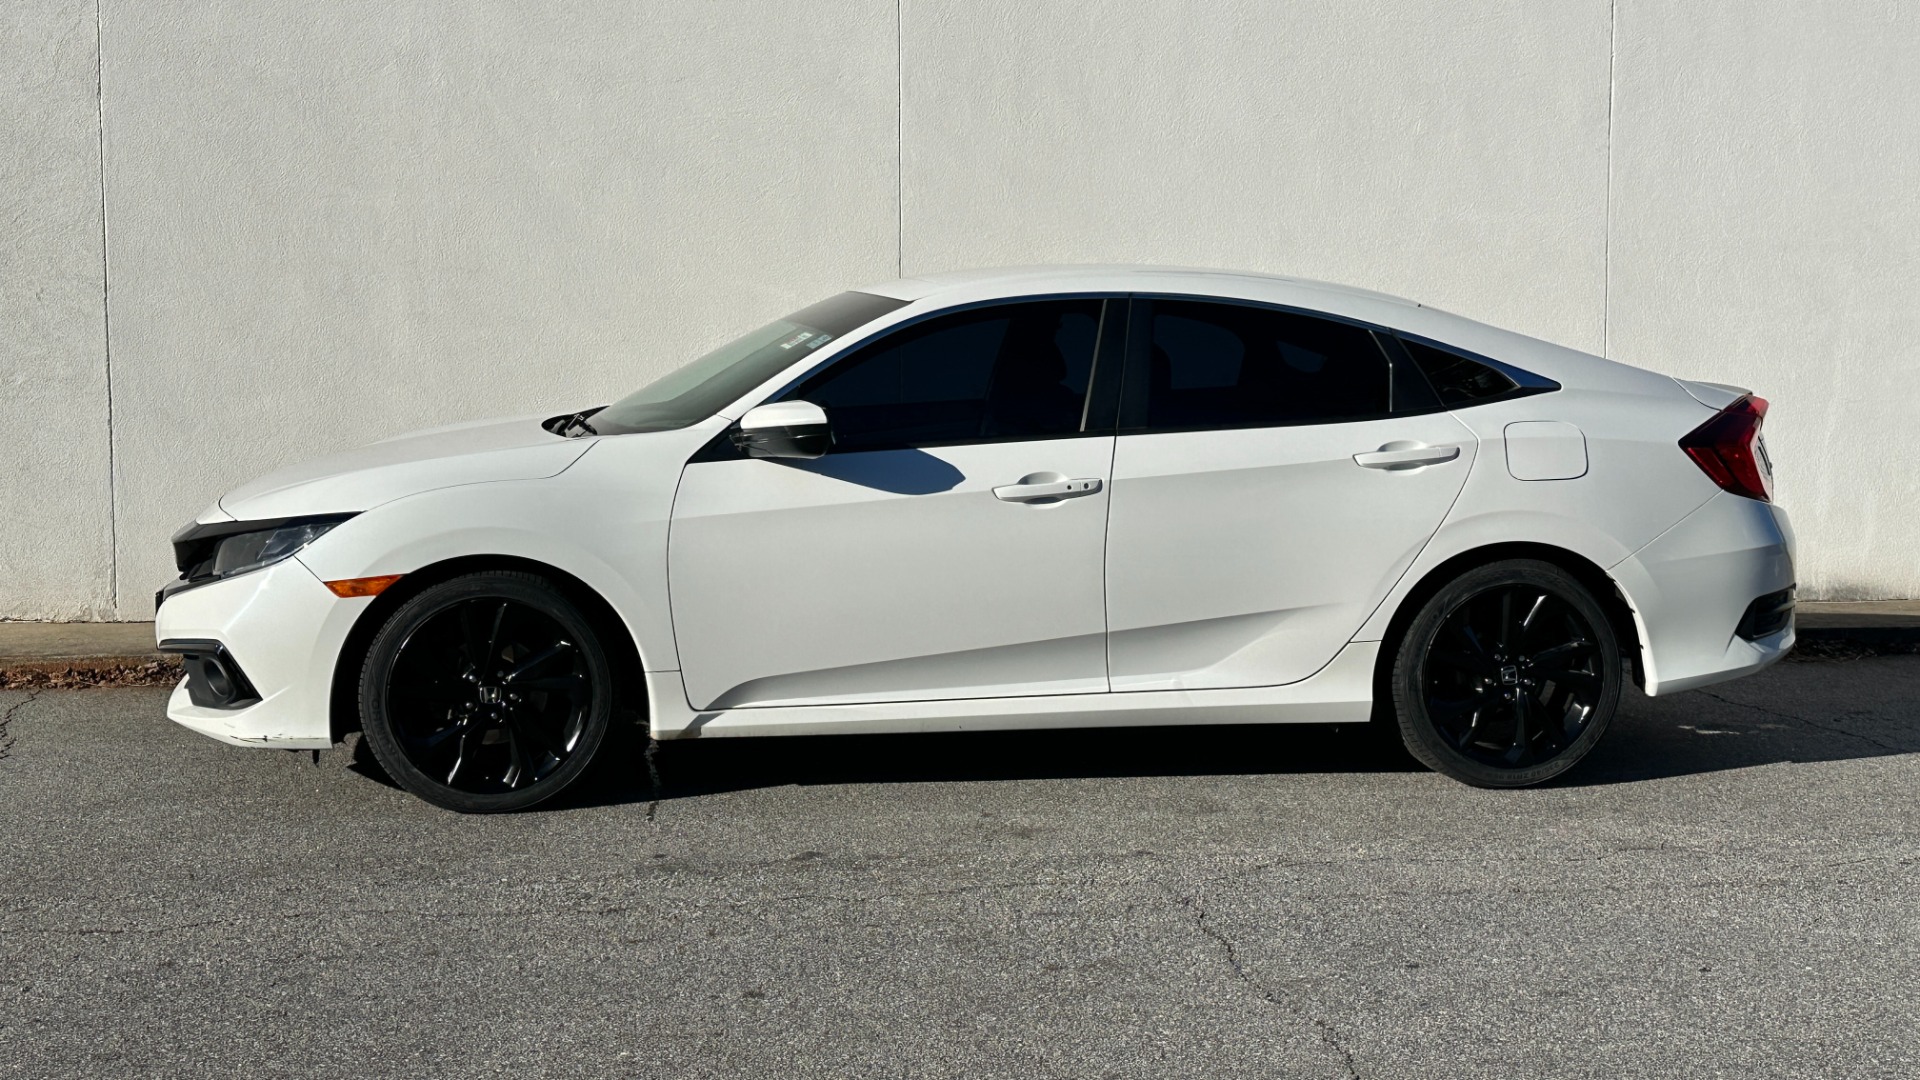 Used 2019 Honda Civic Sedan SPORT / CLOTH / REARVIEW / 4CYL for sale Sold at Formula Imports in Charlotte NC 28227 3